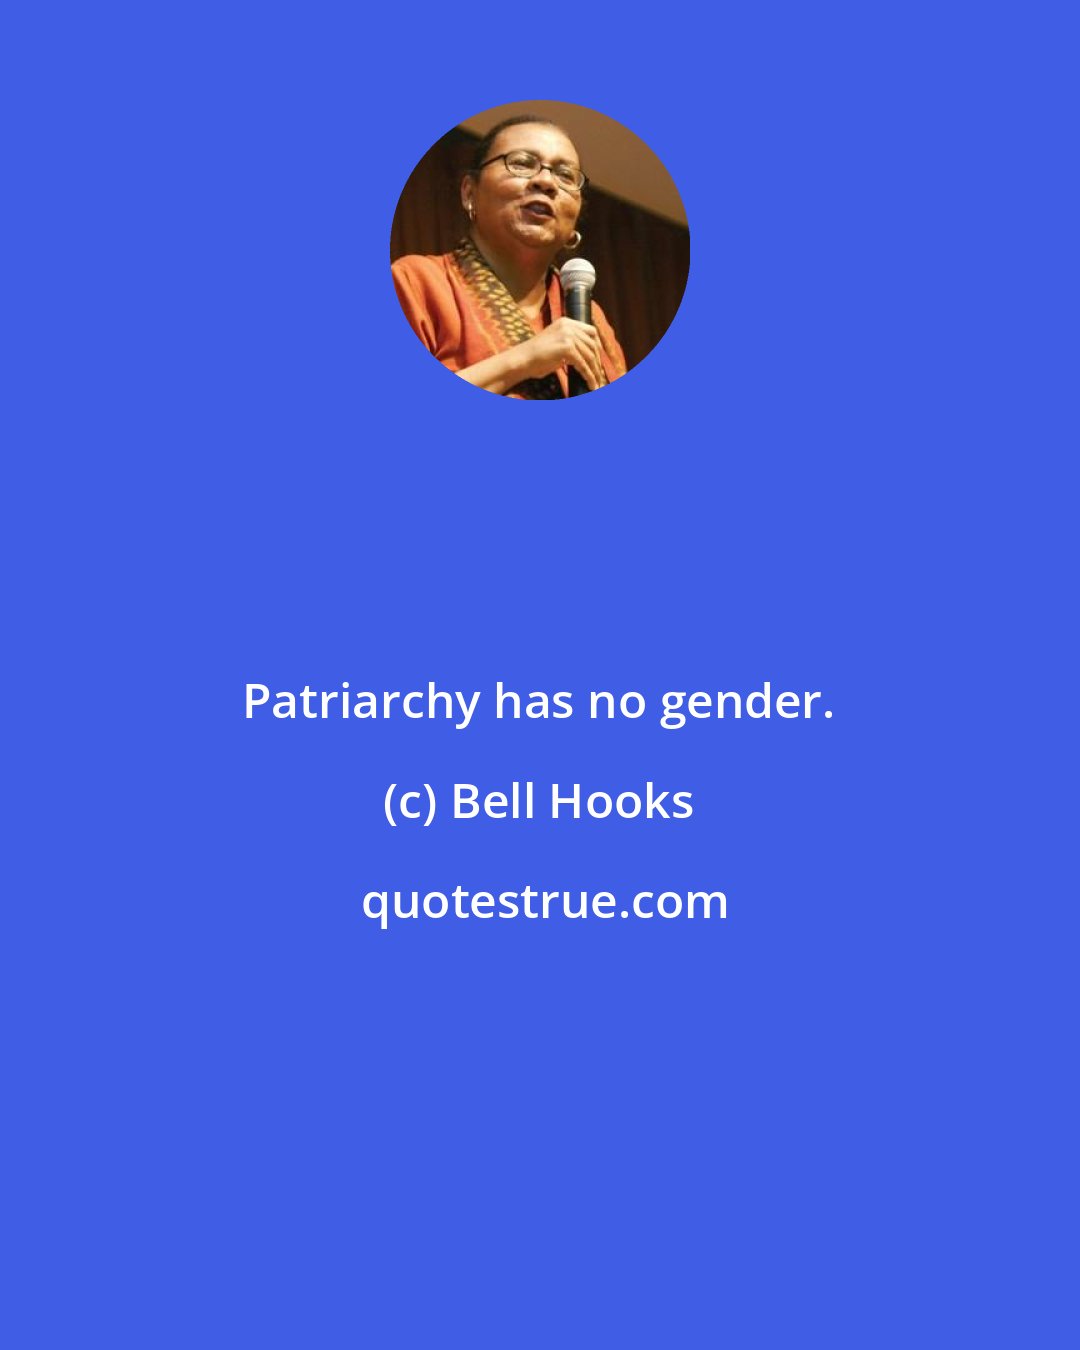 Bell Hooks: Patriarchy has no gender.